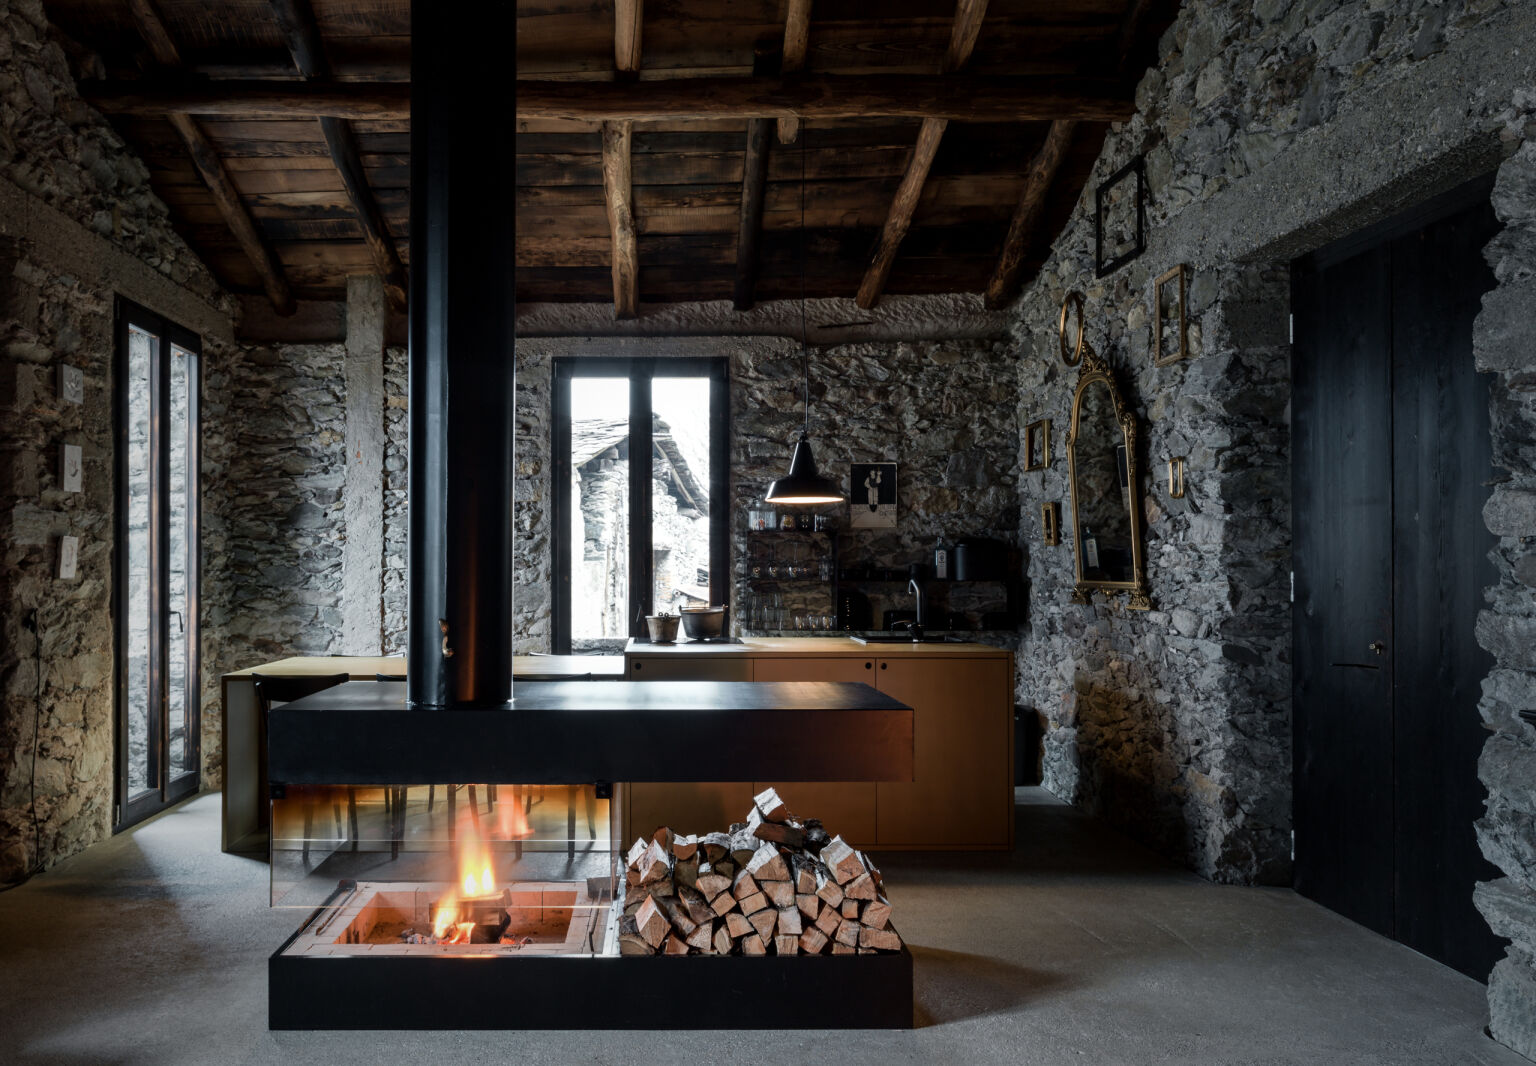 Ca’Giovanni: An Architect’s (Gentle) Renovation of His Great-Grandfather’s Work